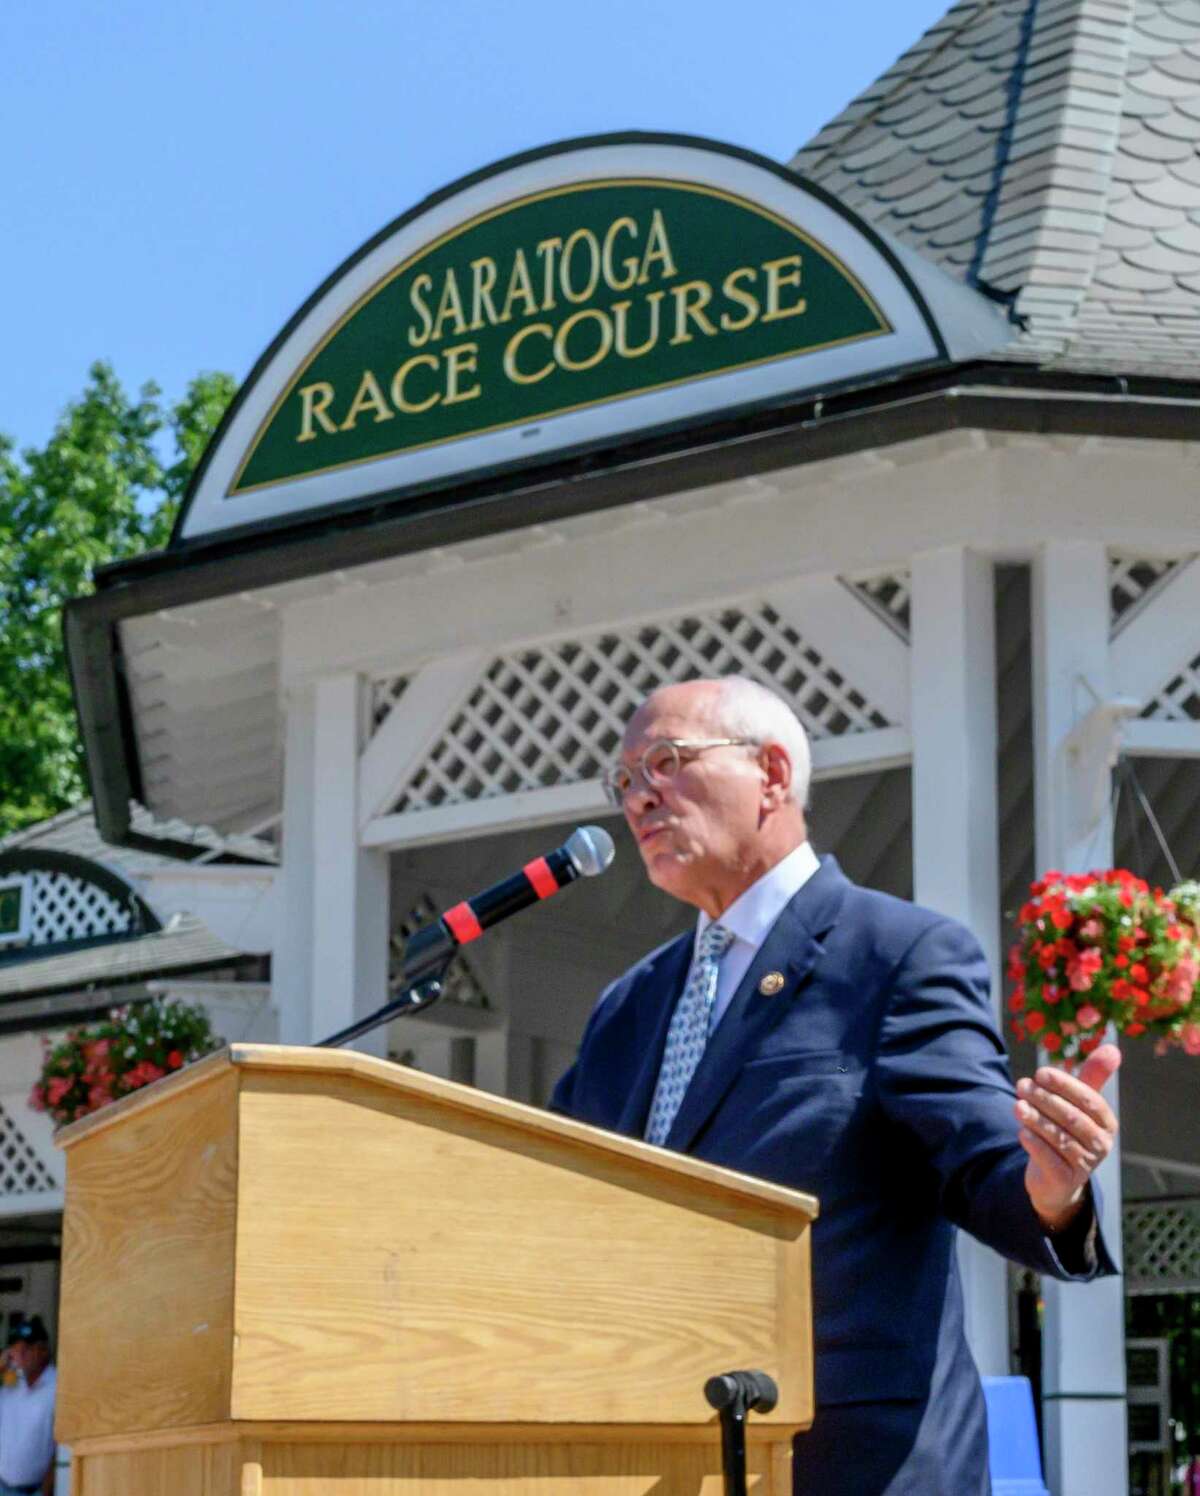 Congressman Paul Tonko speaks about the Horse Integrity Act during a press conference at the Saratoga Race Course in Saratoga Springs, N.Y. Thursday, Aug. 1, 2019 in Saratoga Springs, N.Y. Photo Special to the Times Union by Skip Dickstein.